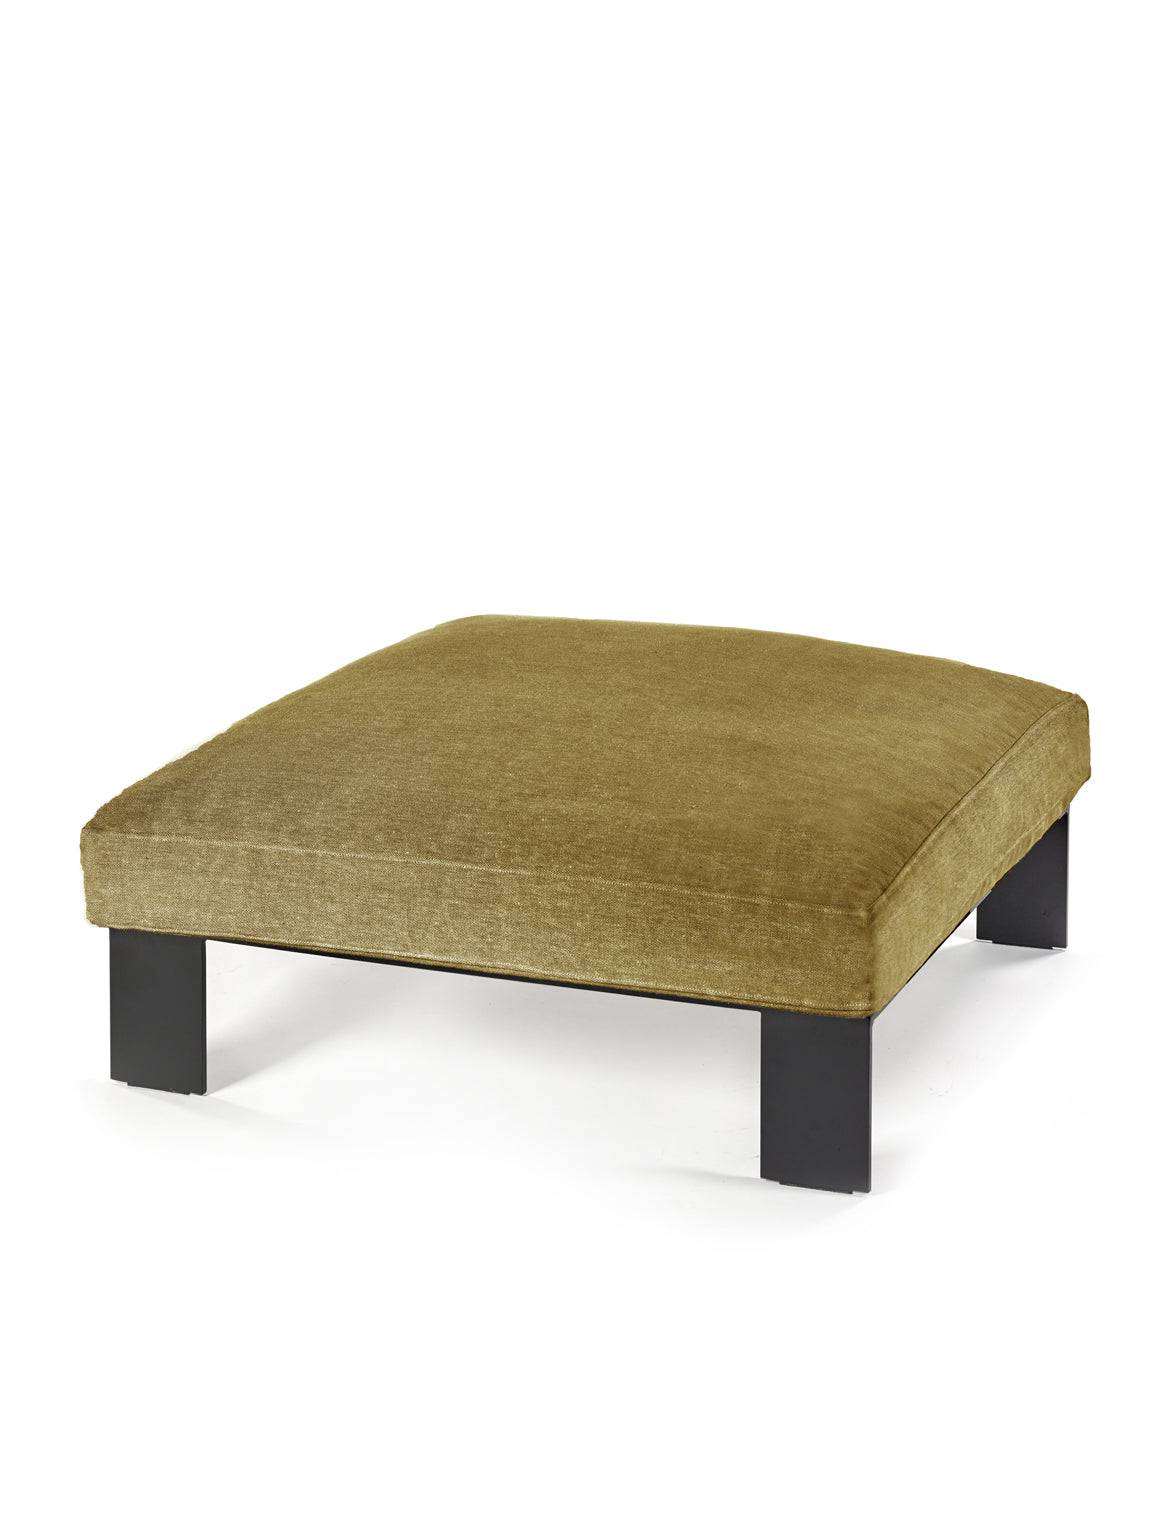 Mombaers Ottoman - Mustard - THAT COOL LIVING